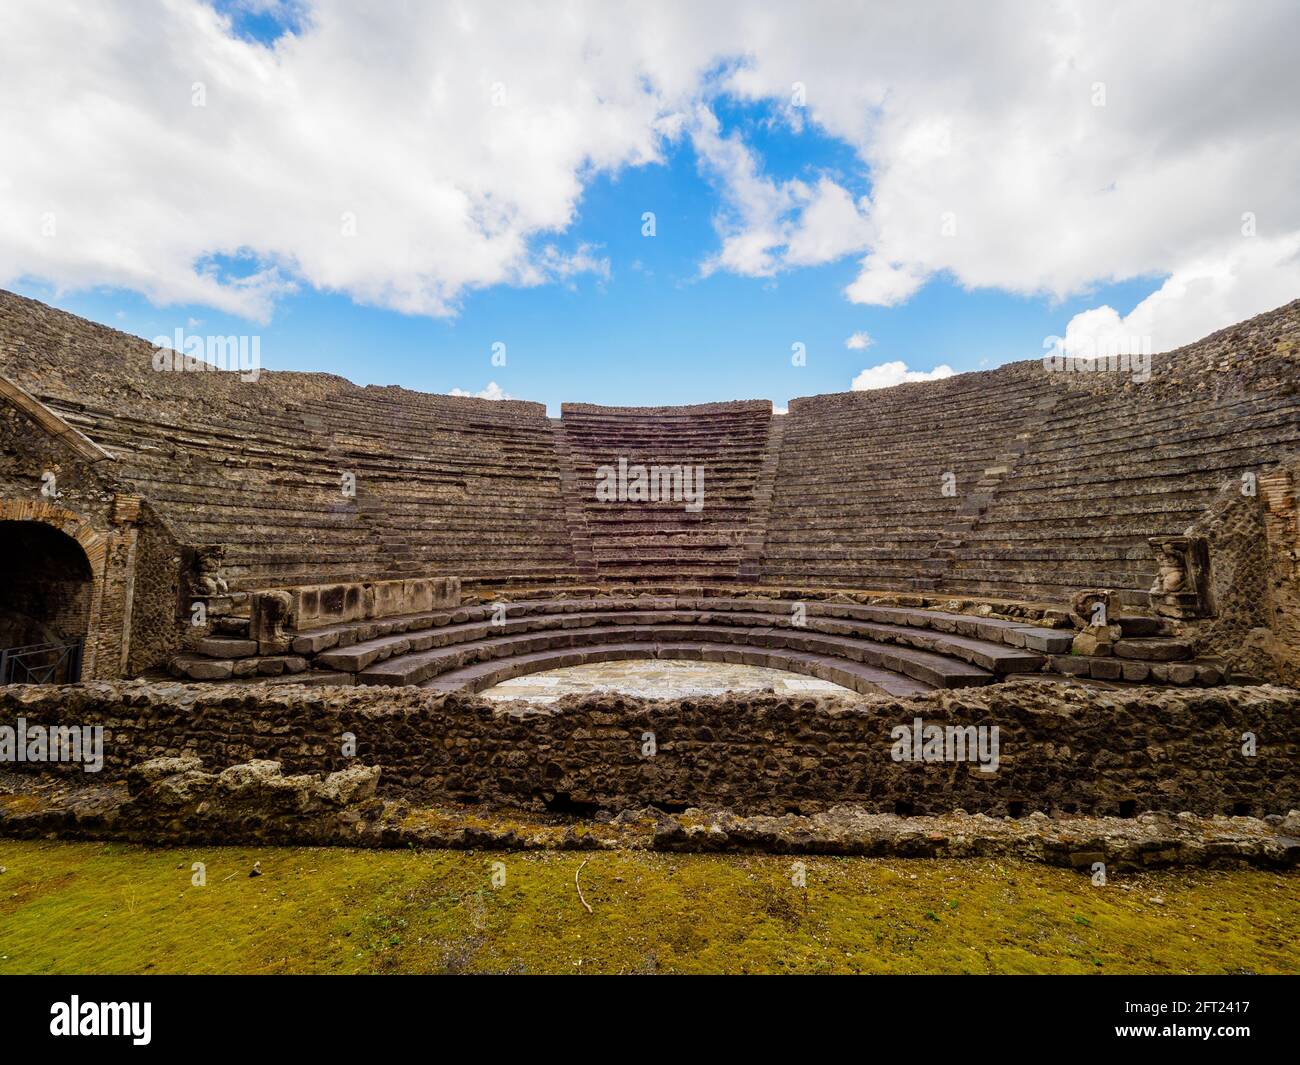 The Odeon or theatrum tectum as it was called by the Romans. This building was dedicated to the representation of the most popular theatrical genre at the time, miming, and could also be used for musical and singing performances - Pompeii archaeological site, Italy Stock Photo